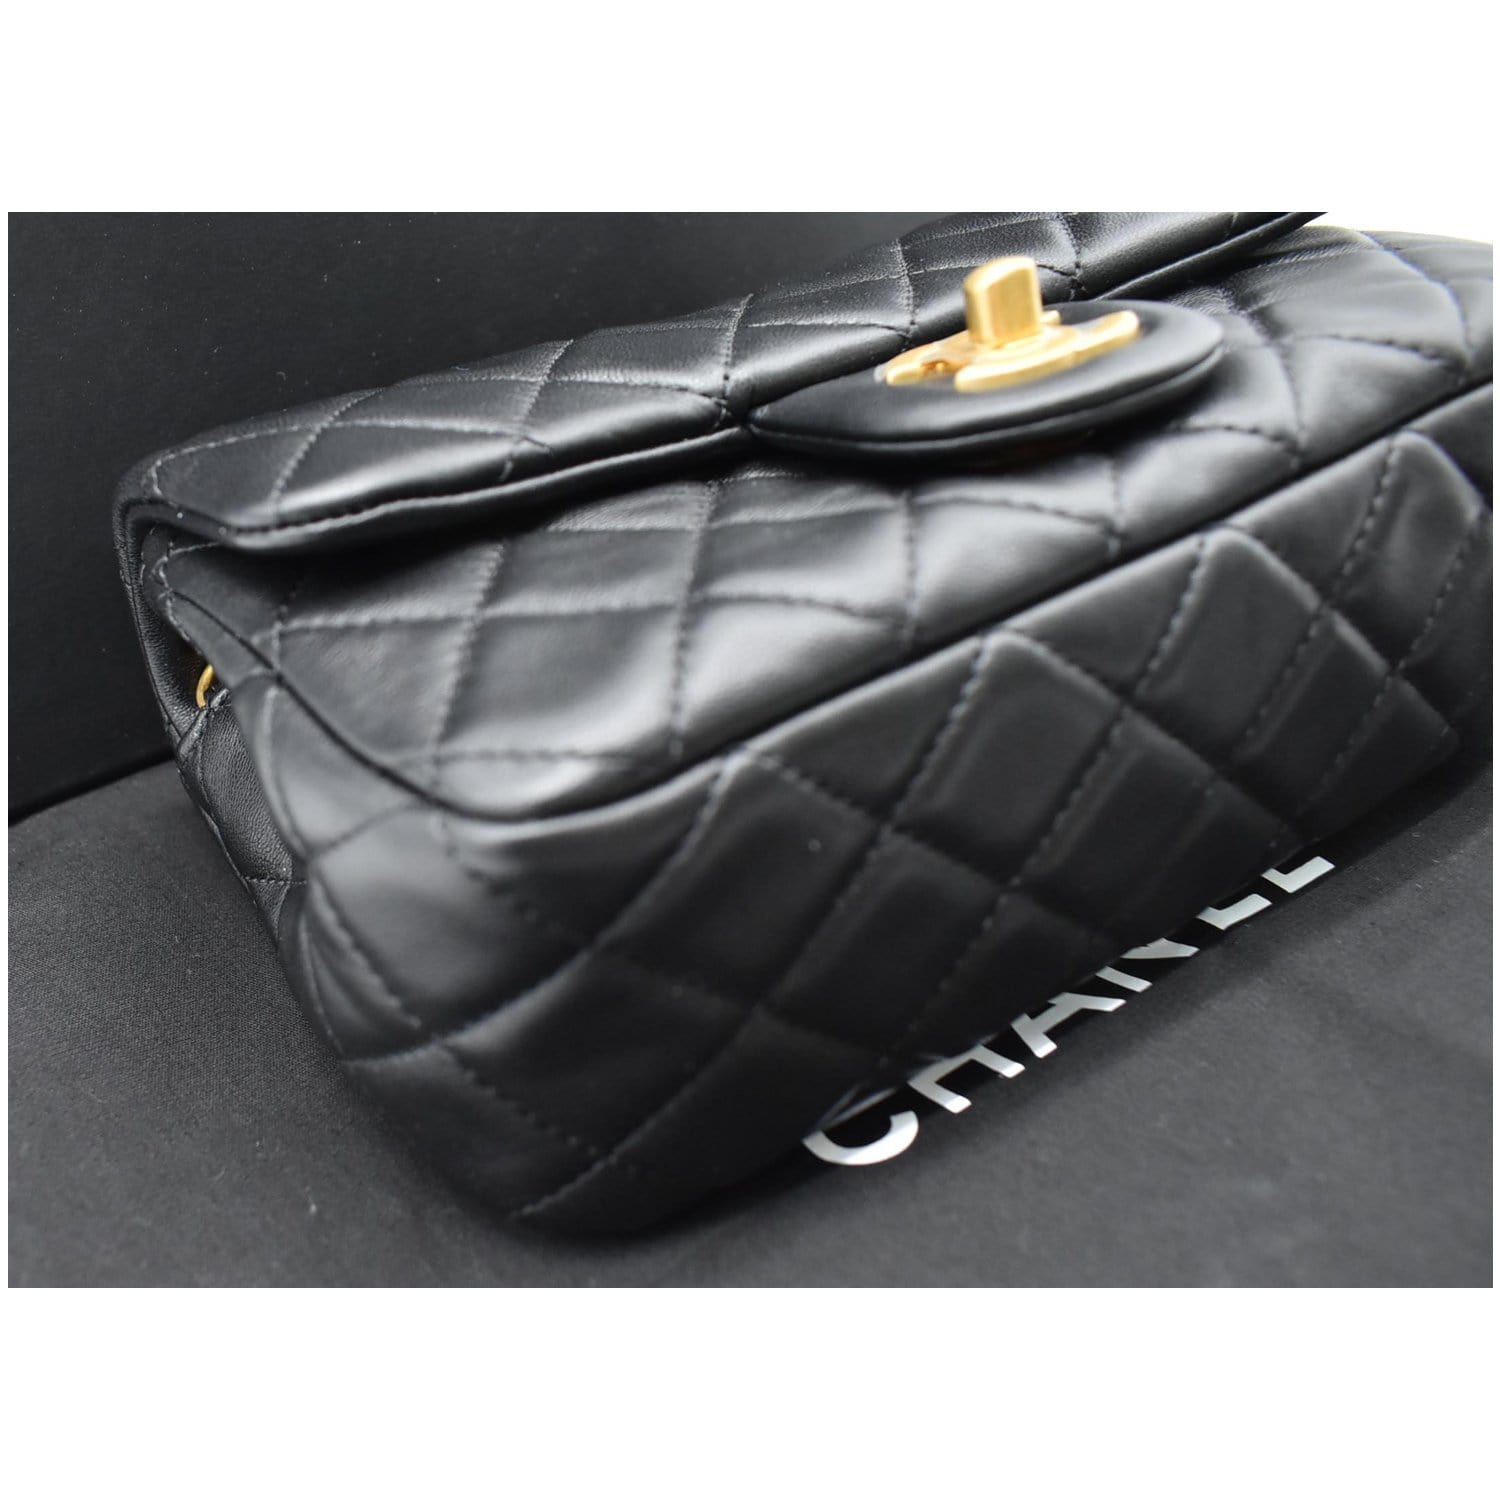 CHANEL Lambskin Quilted Mini CC Pearl Crush Flap Pink